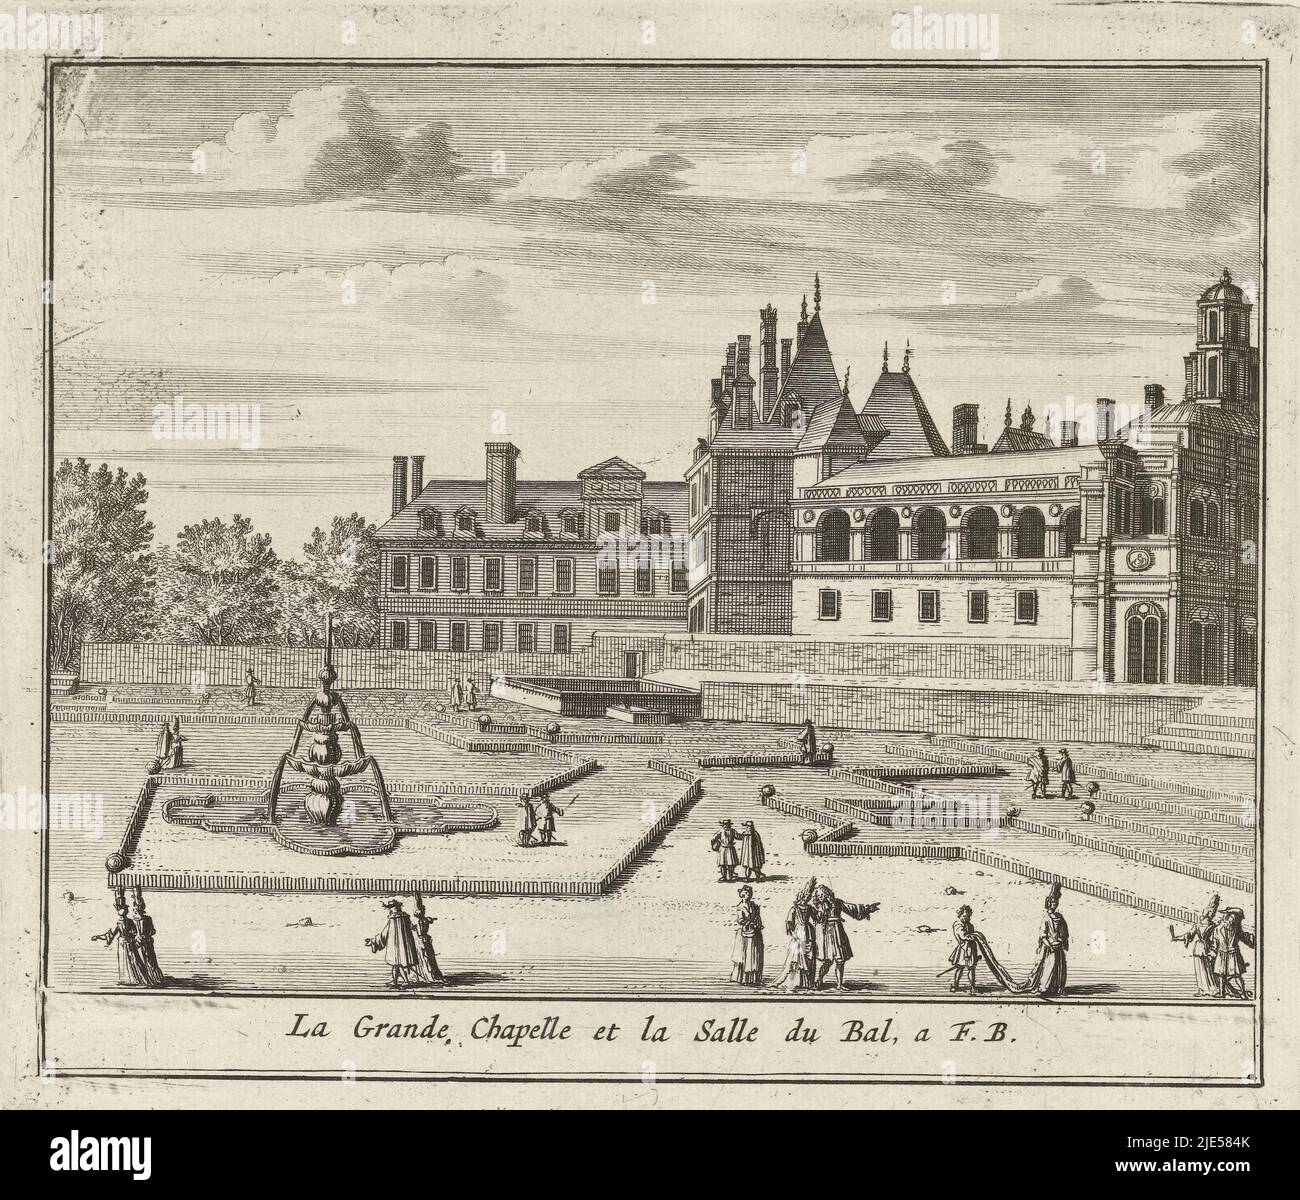 The Grande Chapelle and the Salle de Bal from the garden of the Palace of Fontainebleau. In the garden there is a fountain and walking figures., View of the Grande Chapelle and the Salle de Bal from the palace of Fontainebleau La Grande Chapelle et la Salle du Bal, a F. B., print maker: Jan Lamsvelt, 1726 - 1743, paper, etching, h 177 mm × w 203 mm Stock Photo